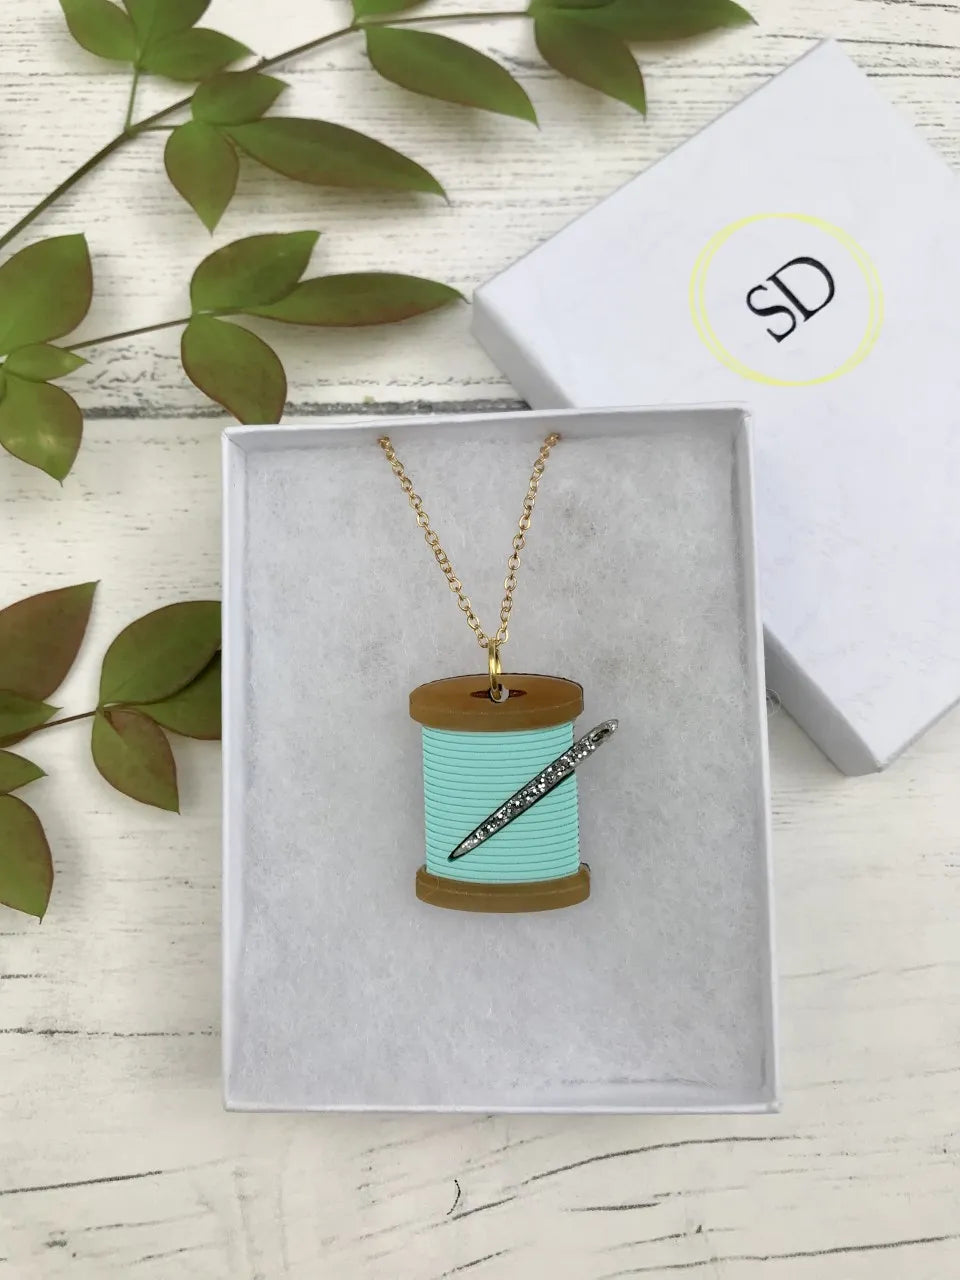 Pastel Mint Green Acrylic Cotton Reel Necklace | Sew Dainty